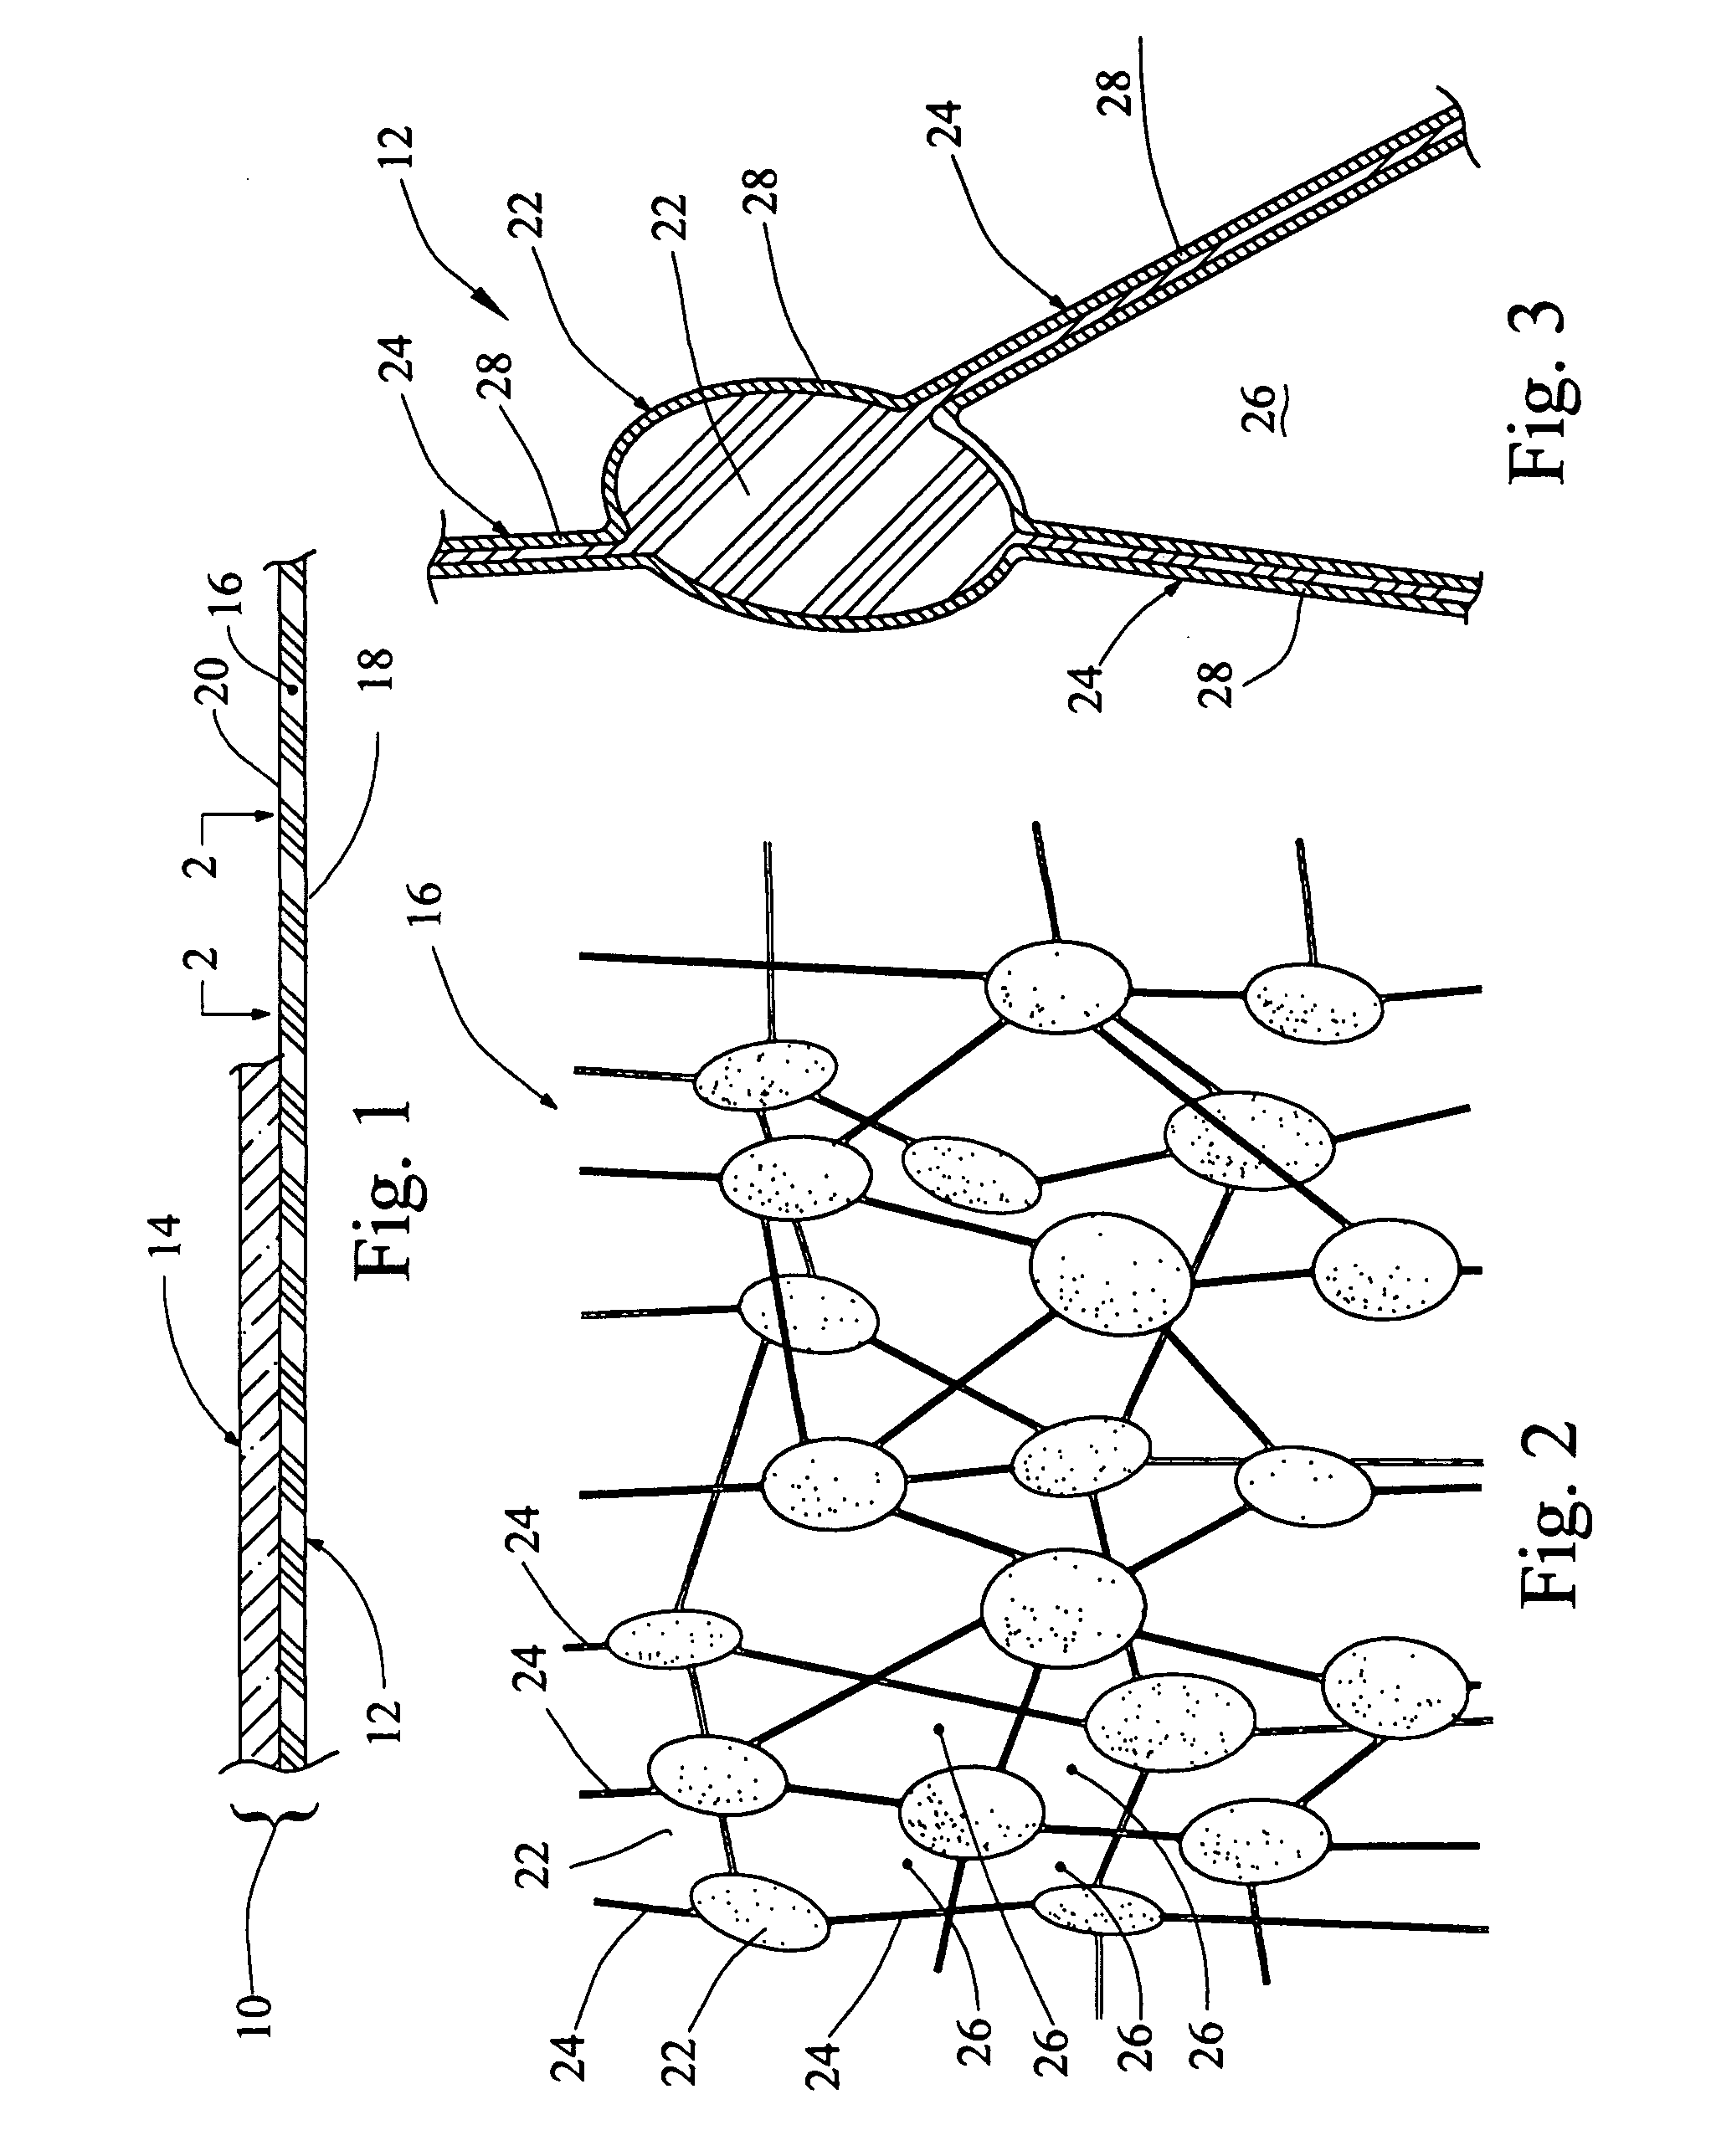 Porous membrane structure and method